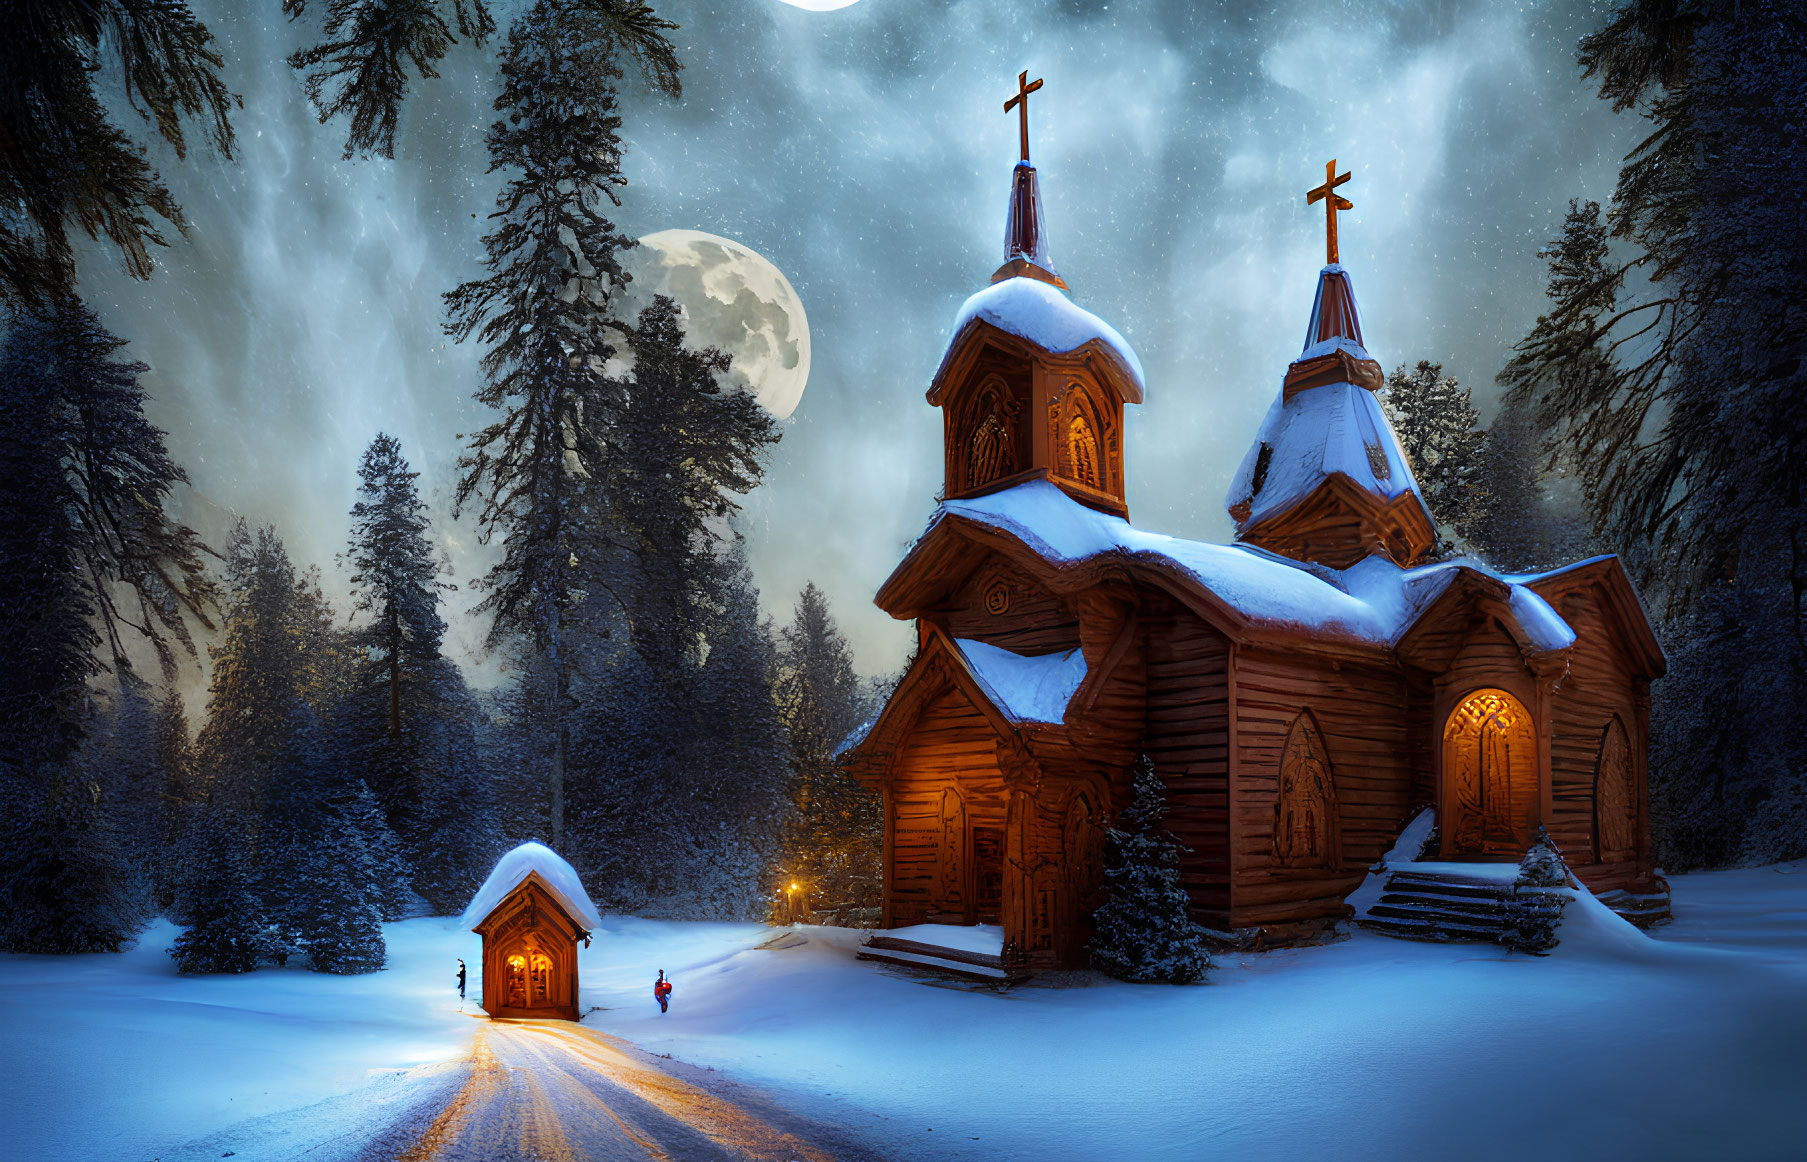 Snowy forest night scene with two wooden churches, moonlit interiors, and a figure approaching one.